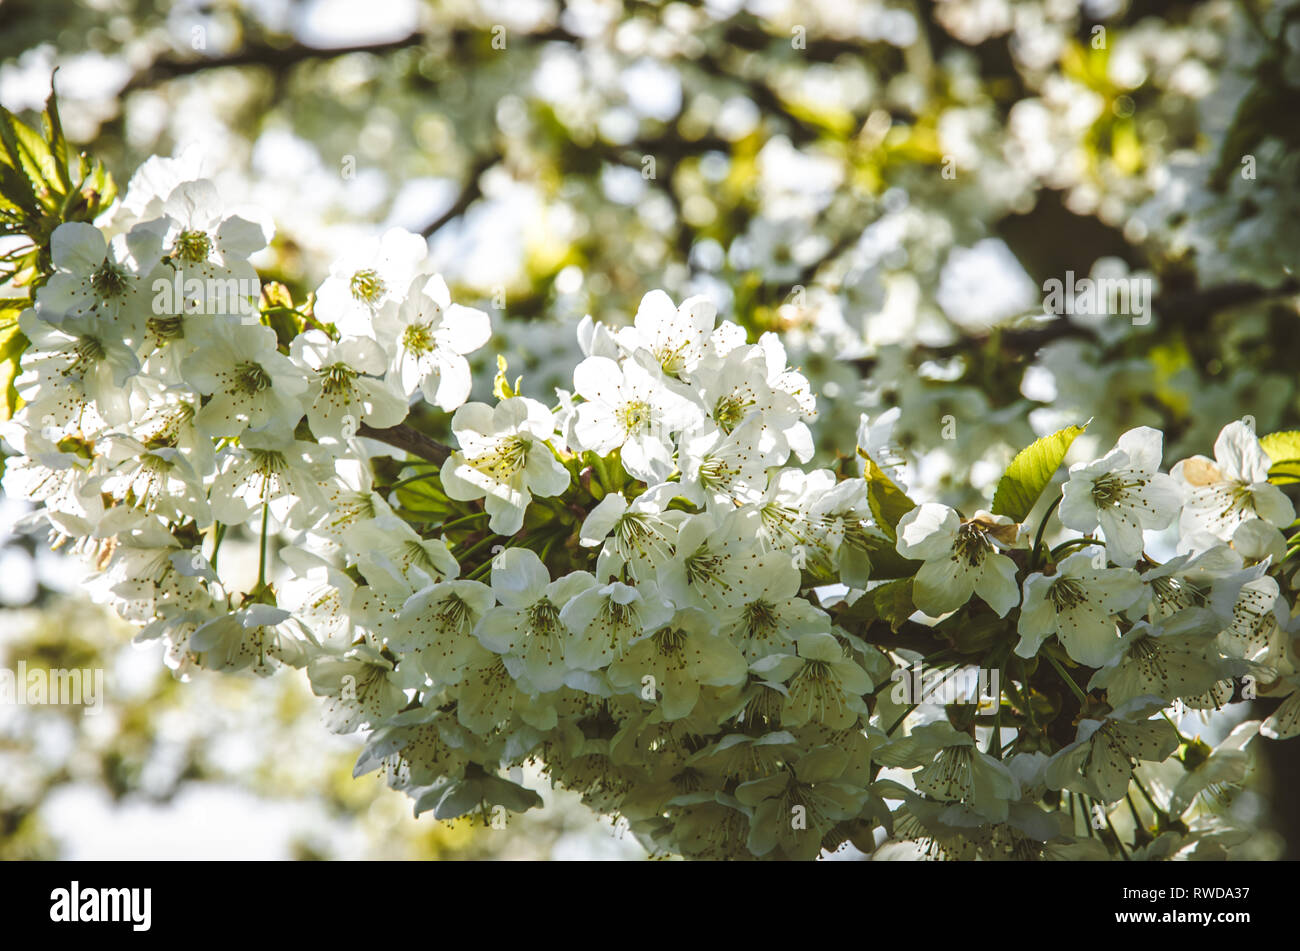 tree with blossoming white flowers in spring season Stock Photo